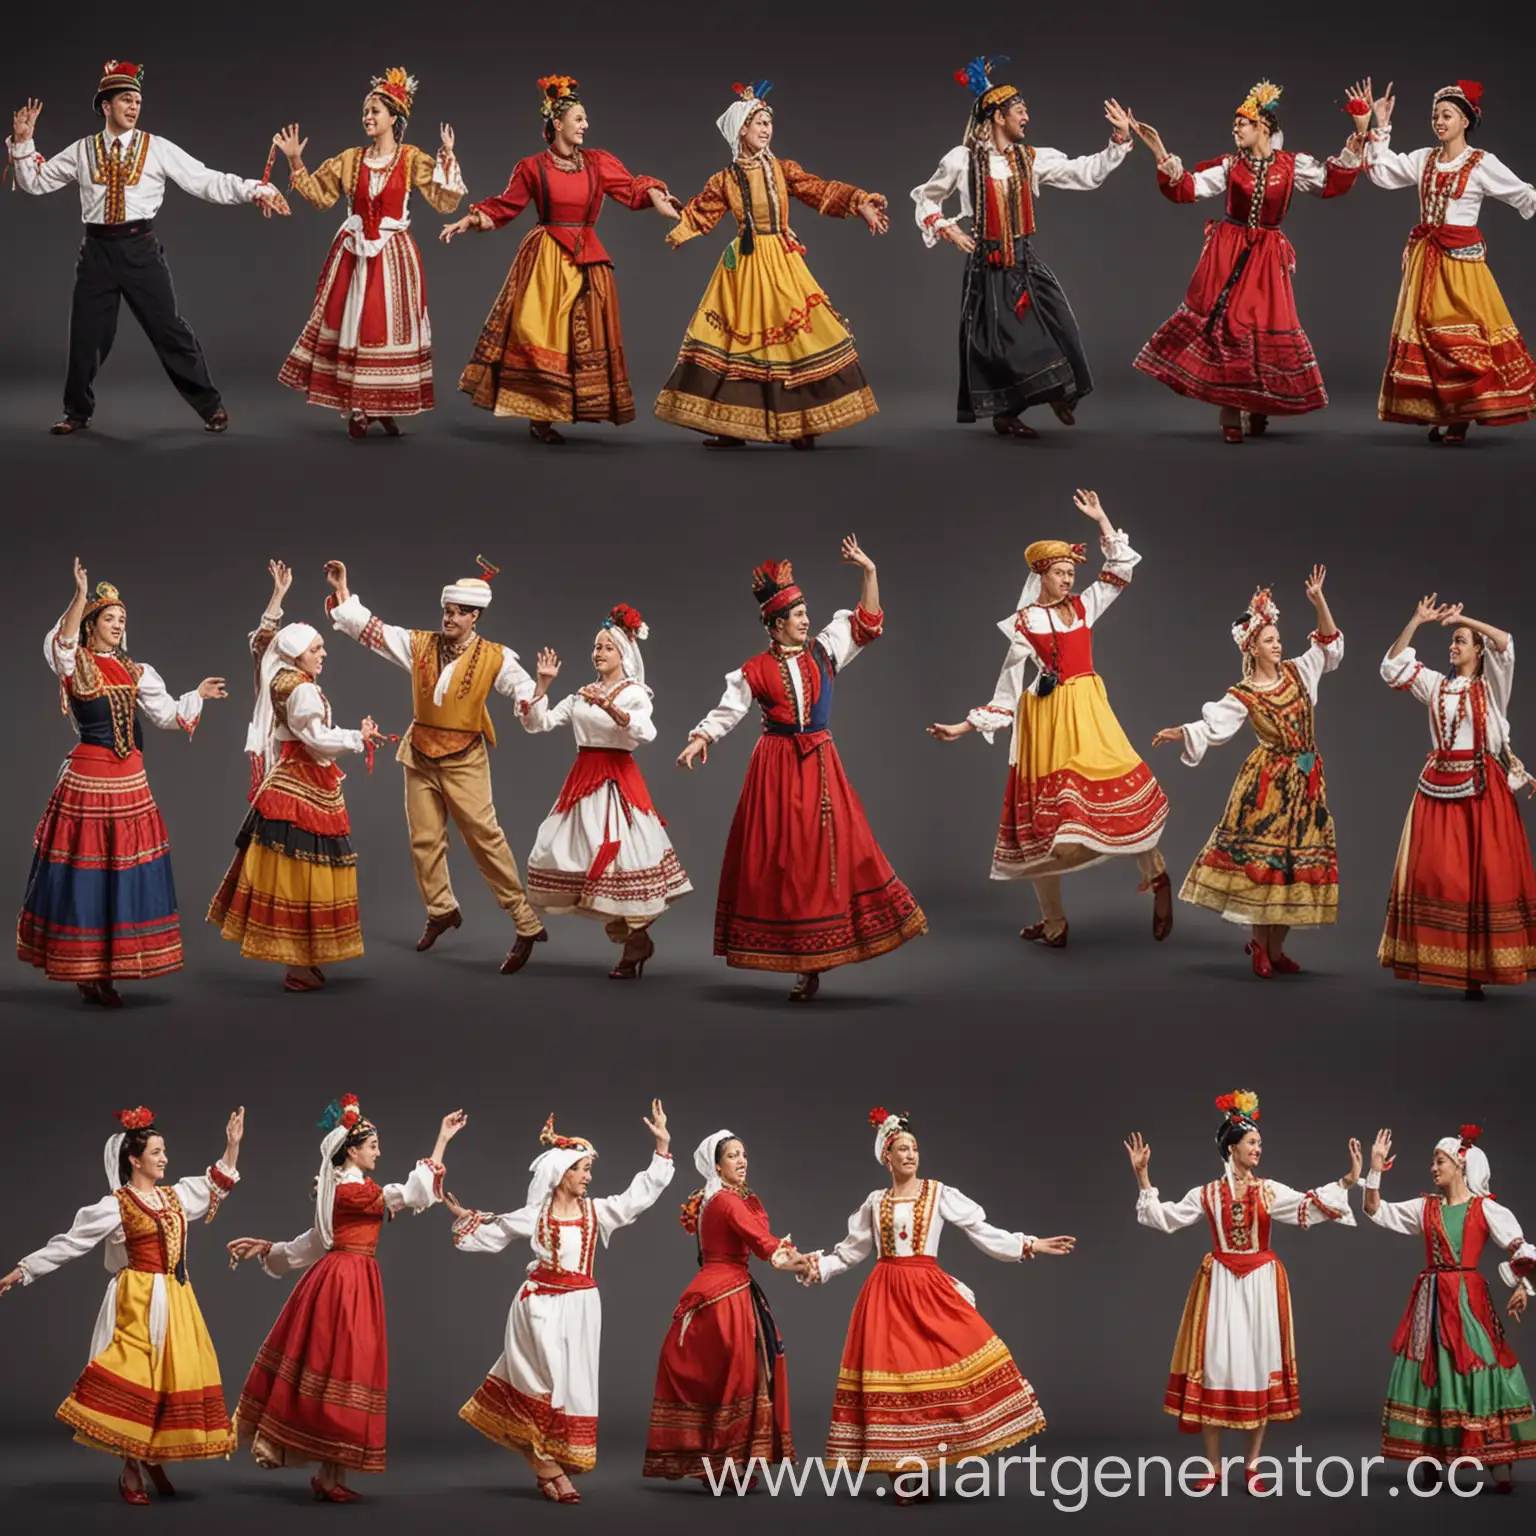 Multicultural-Dance-Celebration-Traditional-Costumes-and-Joyful-Movements